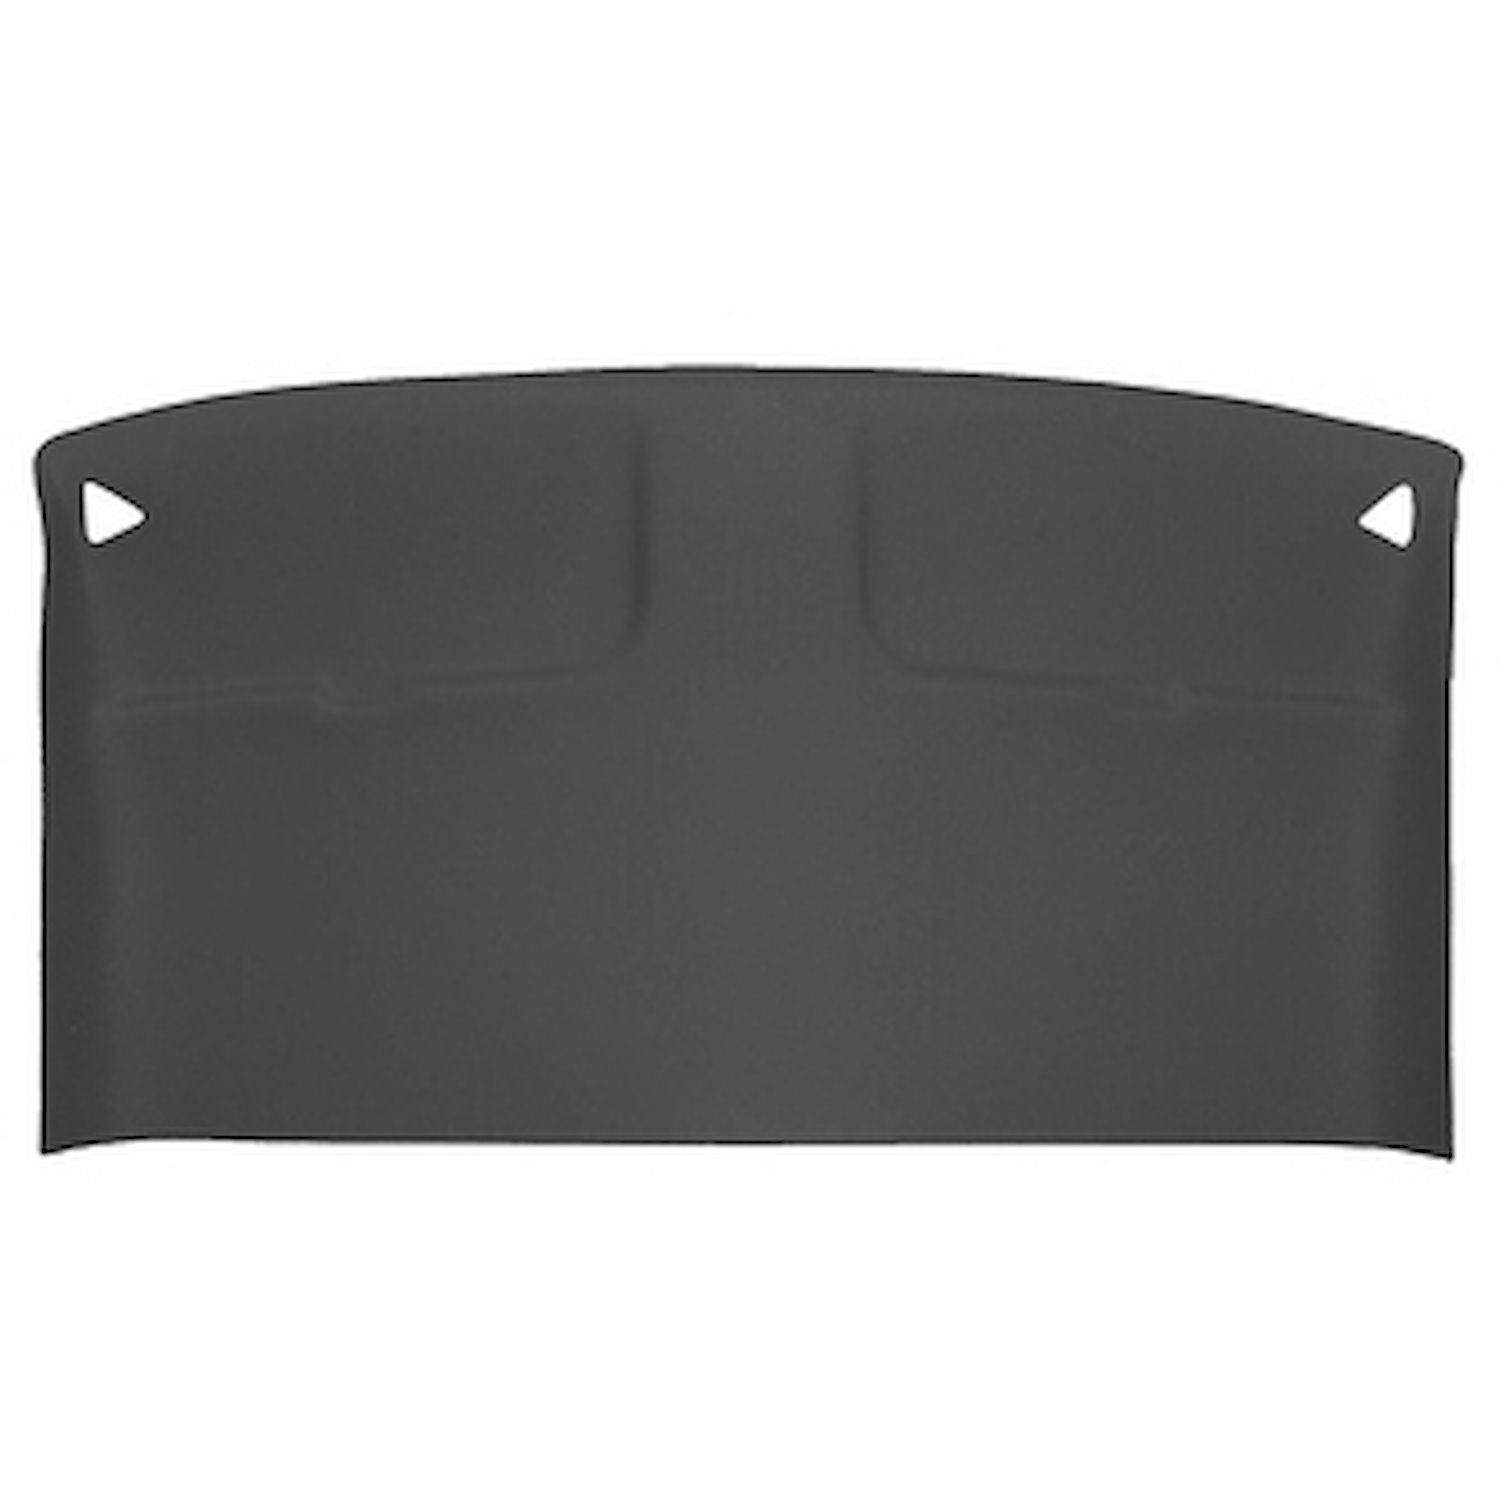 ABS Plastic Headliner 1988-1998 Chevy/GMC C/K Truck Standard Cab - Covered - Ox Grey Cloth